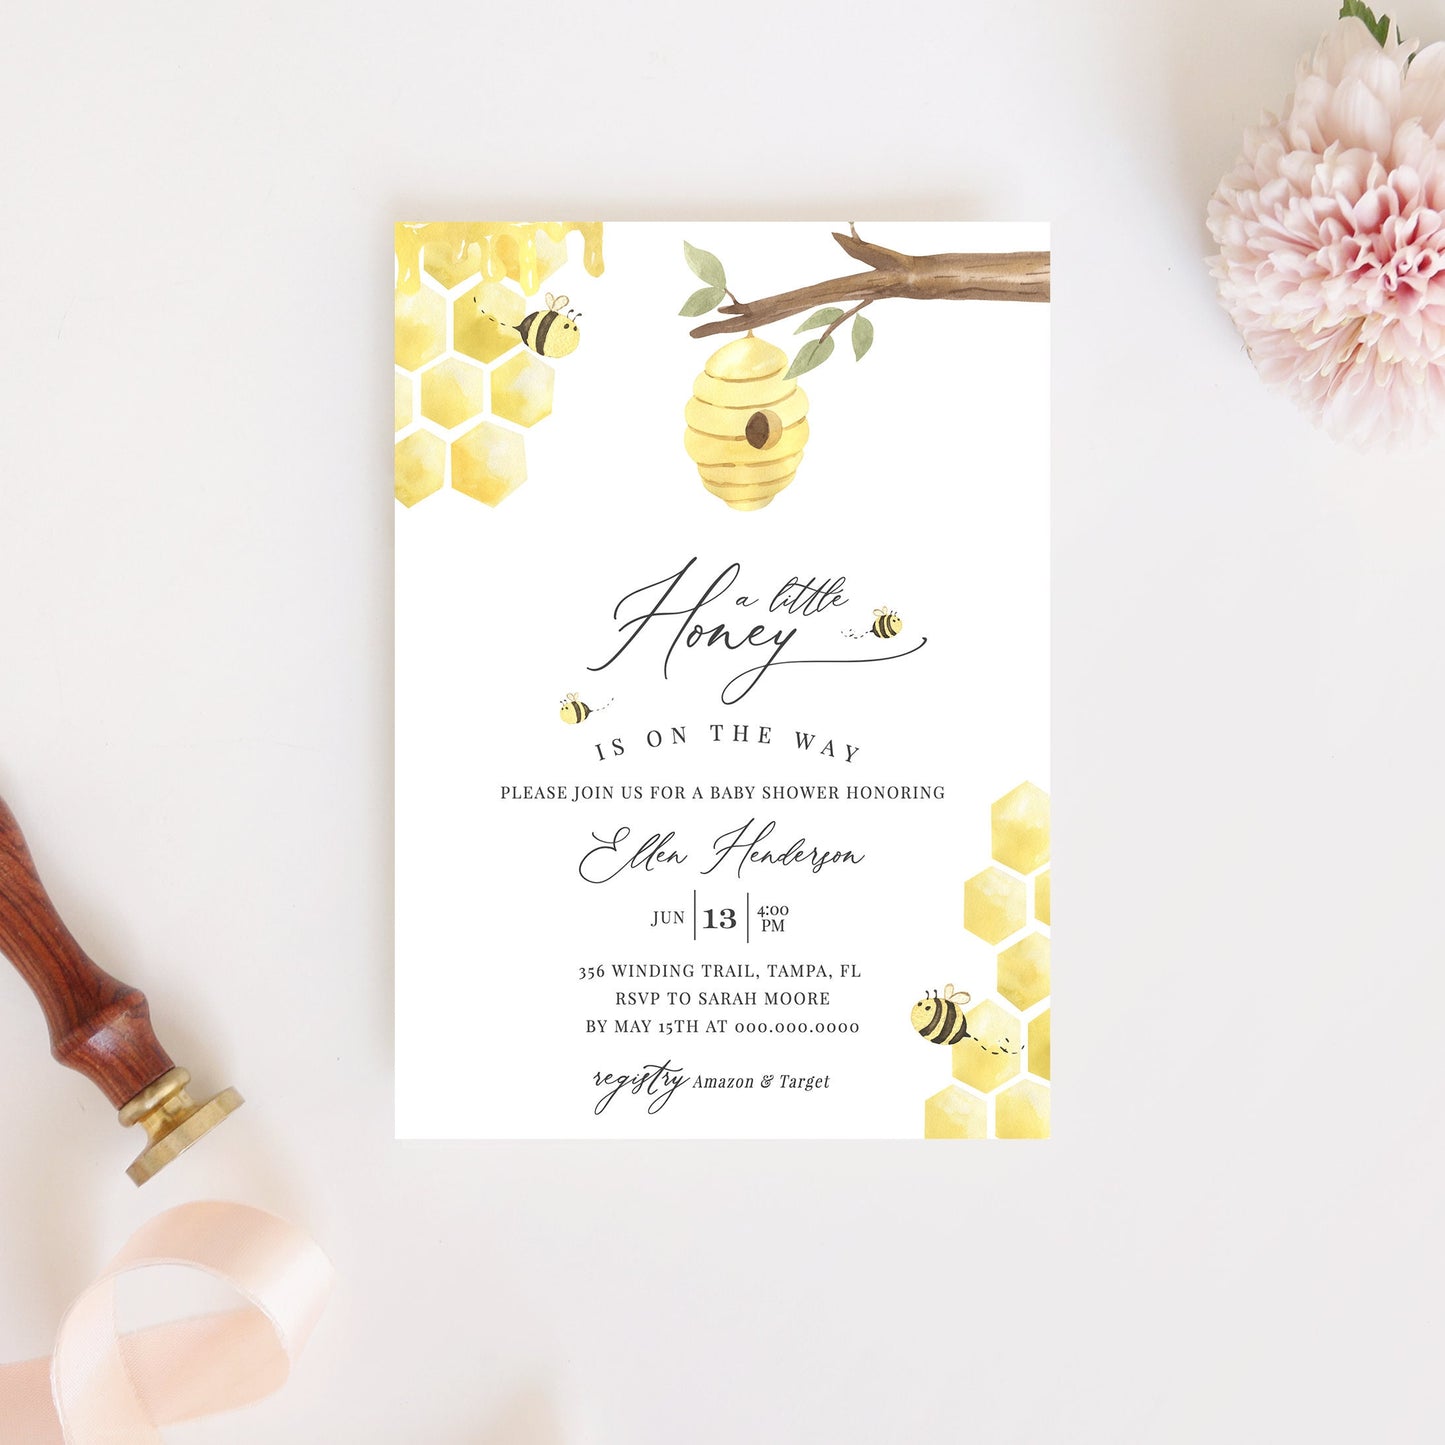 Editable Bee Baby Shower Invitation A Little Honey Shower Invite Honey Bee Baby Shower Invitation Template